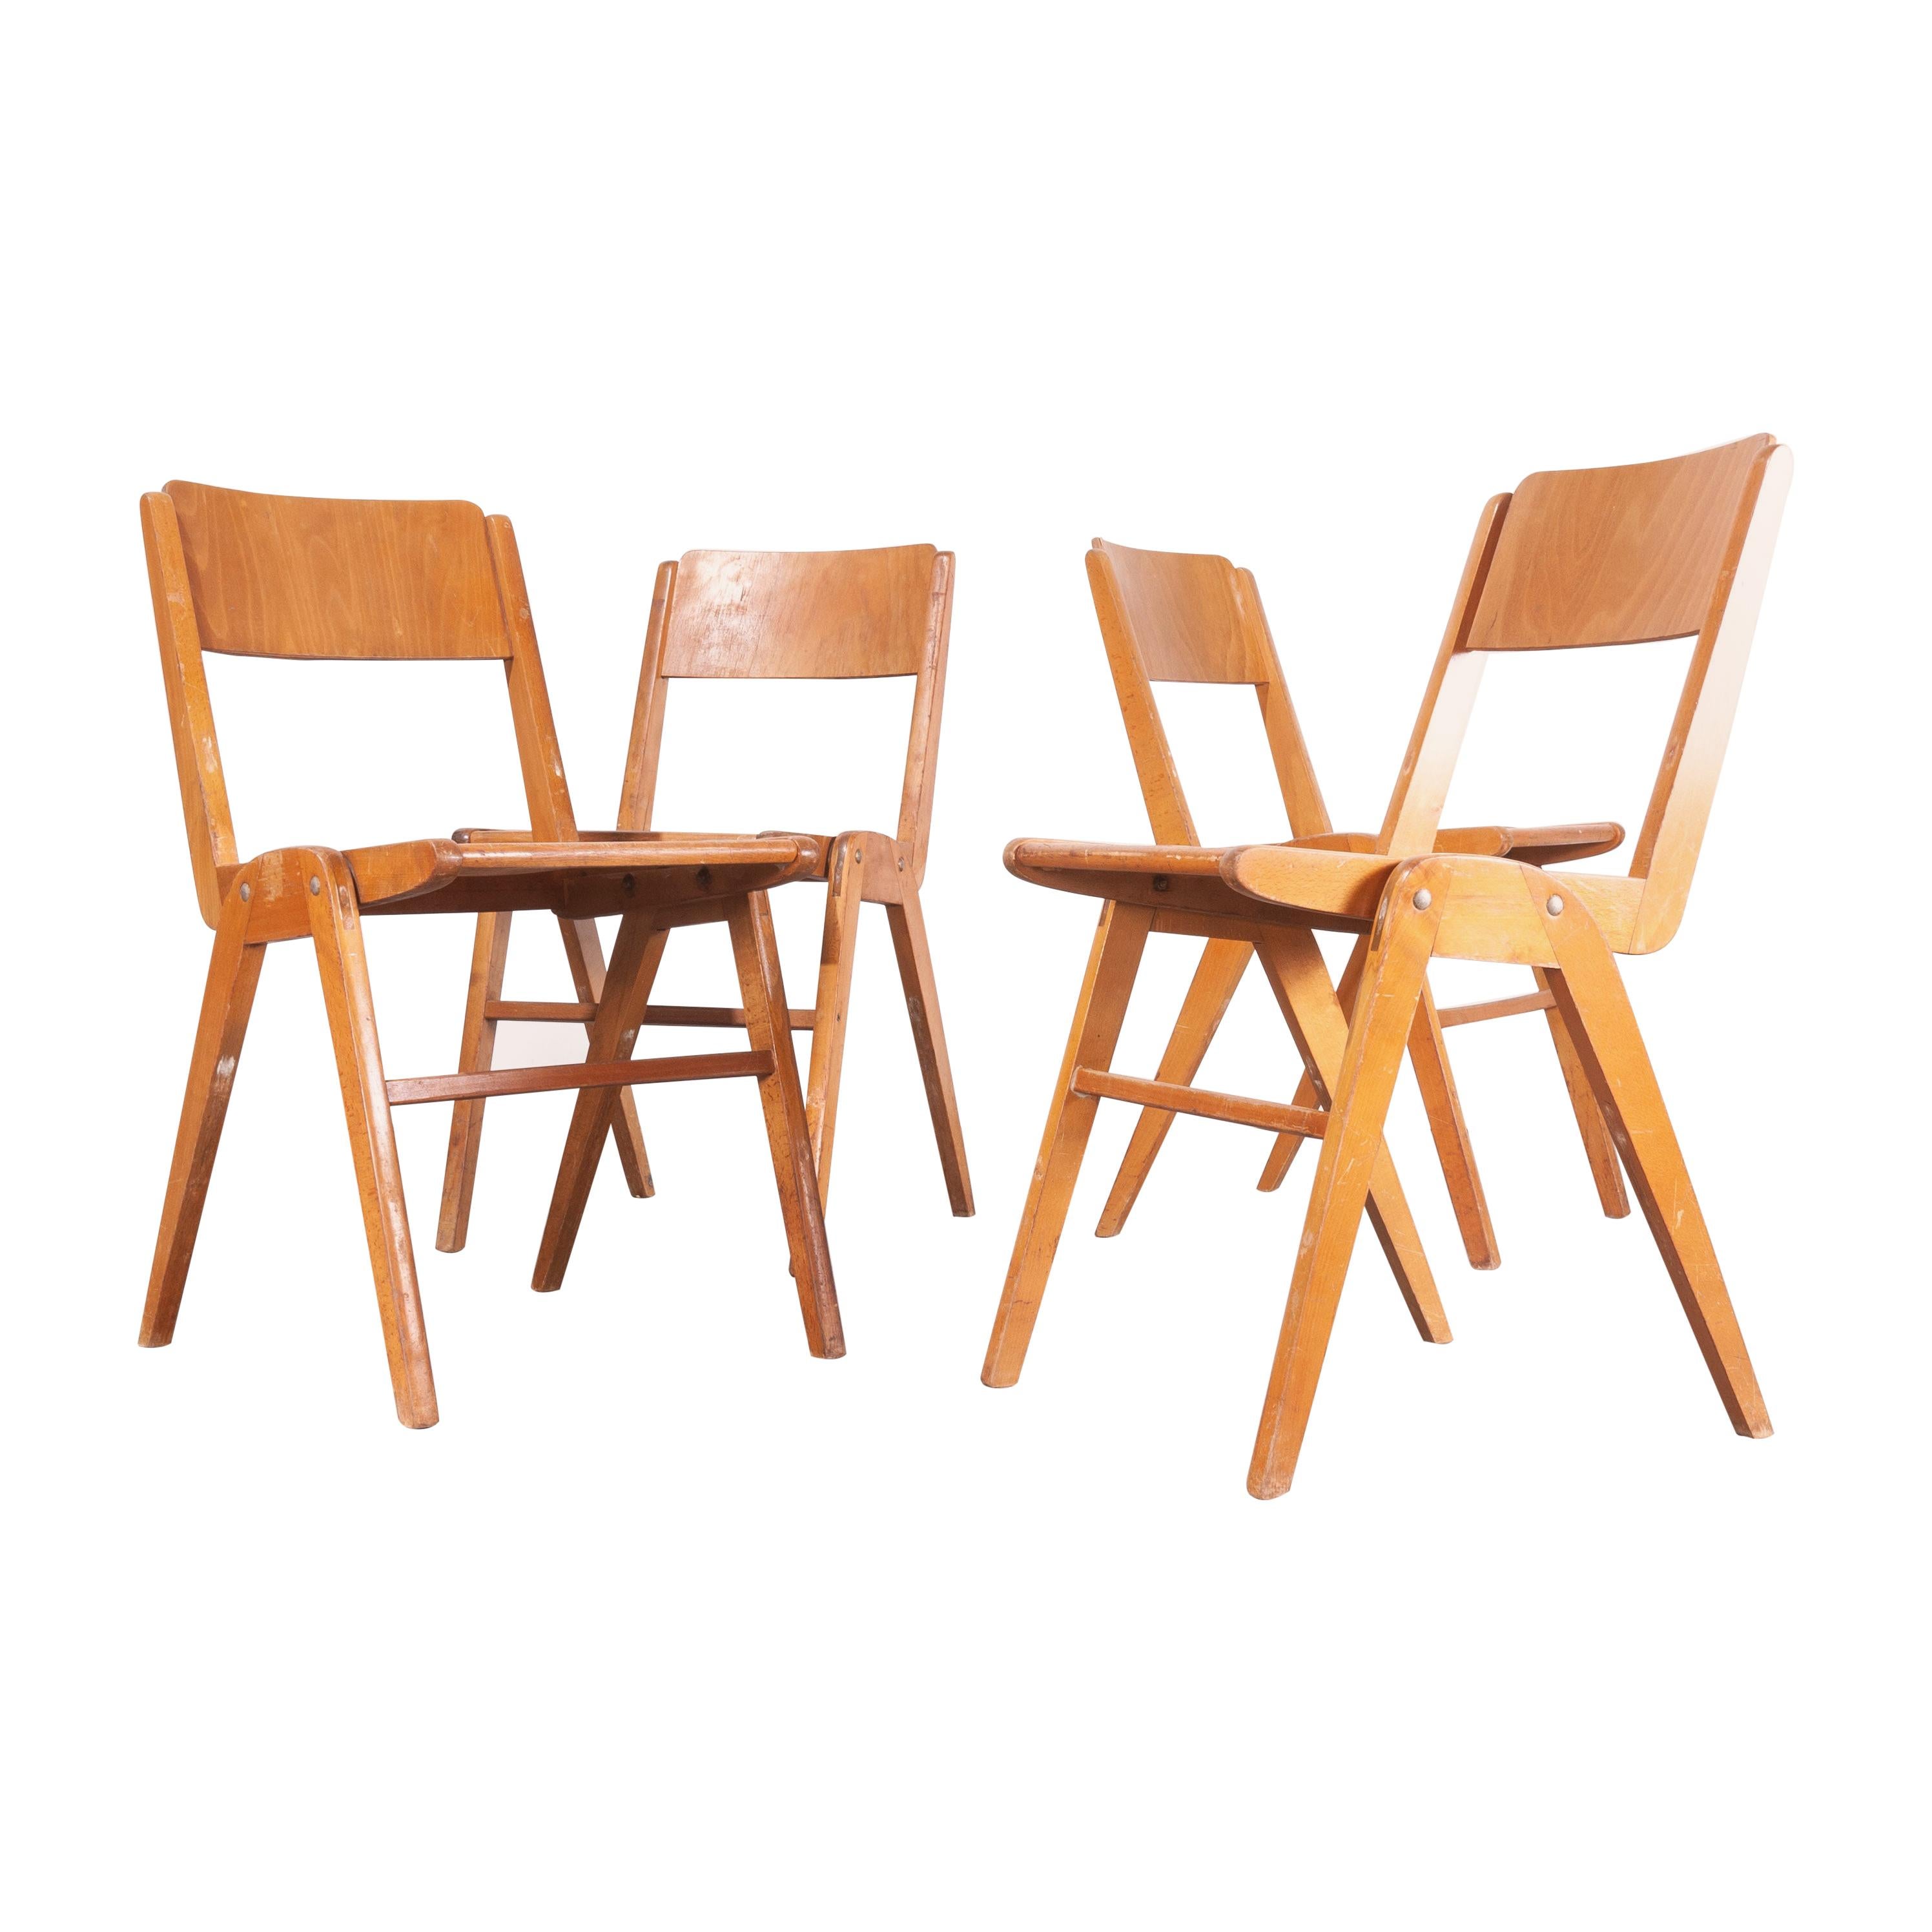 1950s Stunning Vintage Casala Dining Chairs, Set of Four